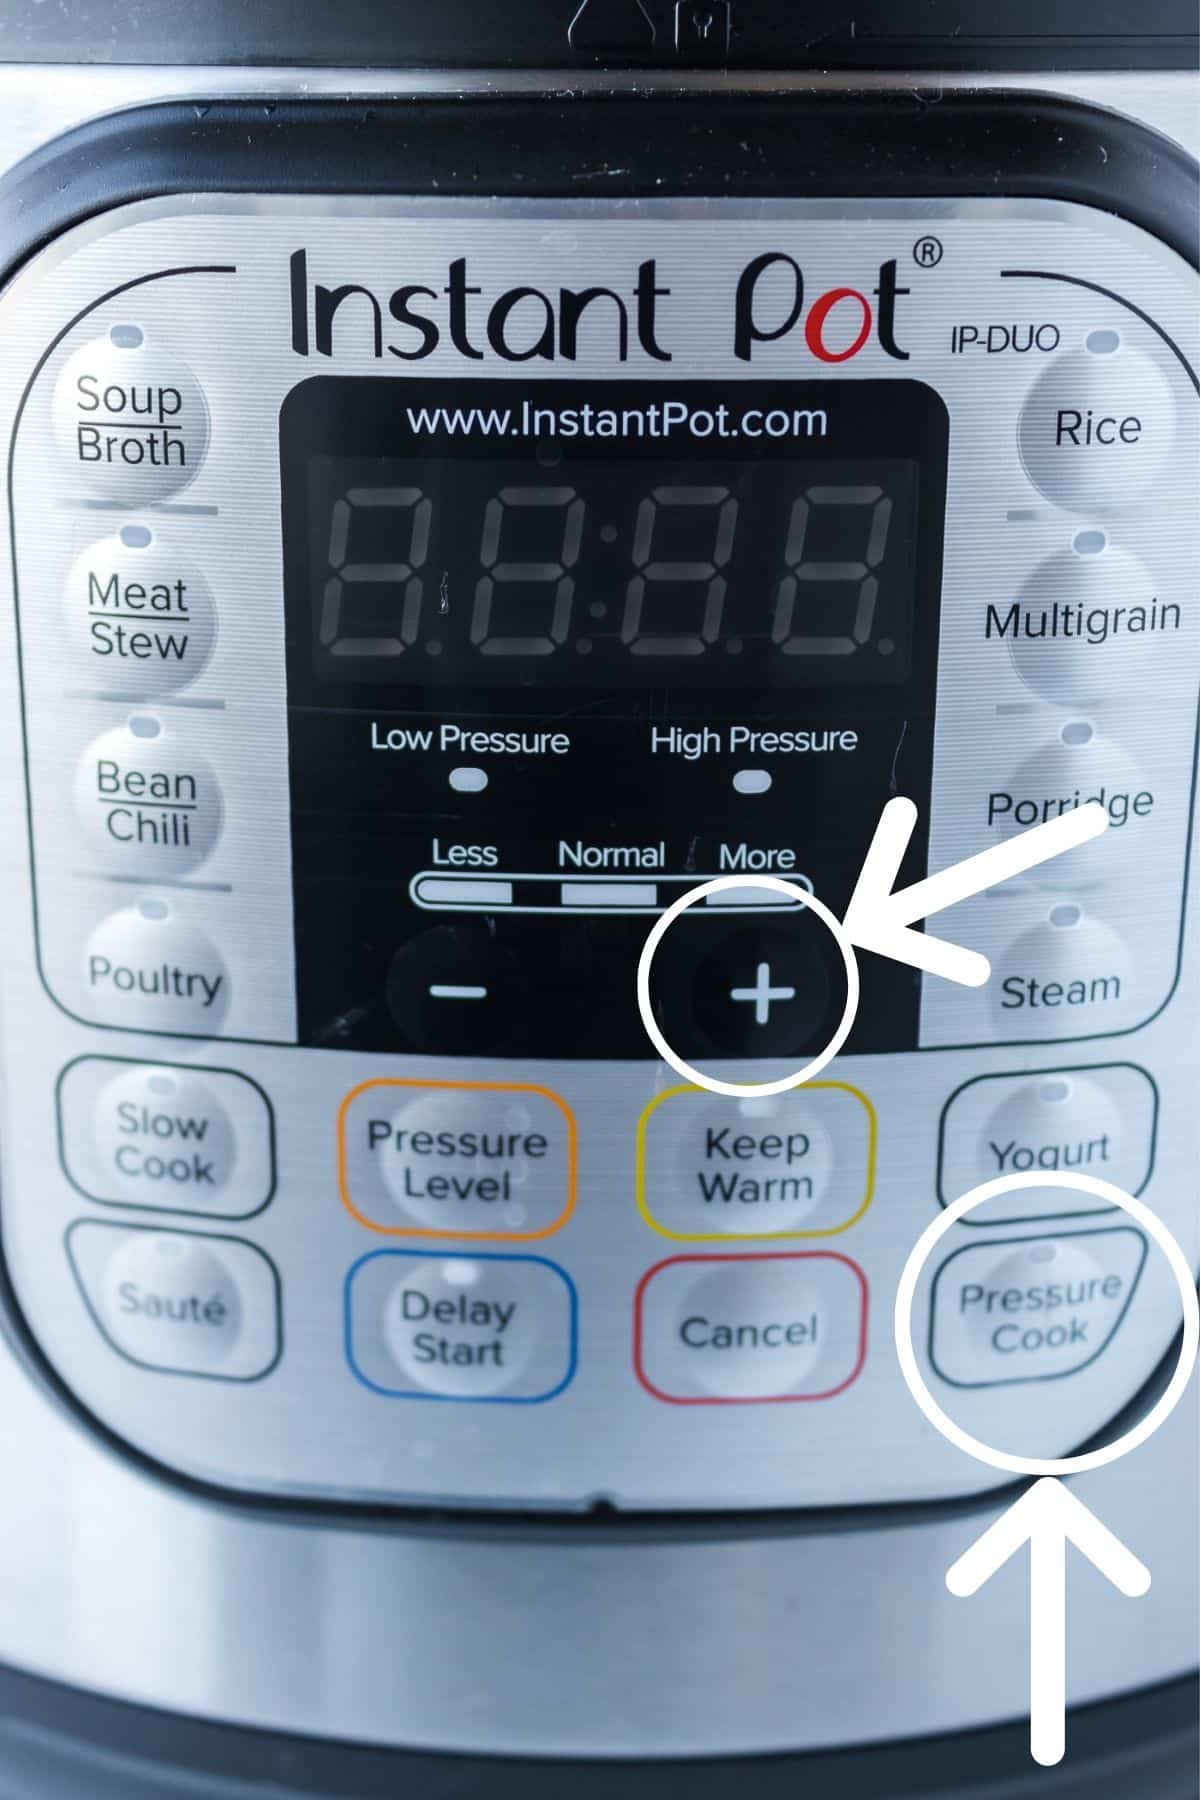 Instant Pot Quick Start Guide for Easy Home Cooking - Adventures of Mel